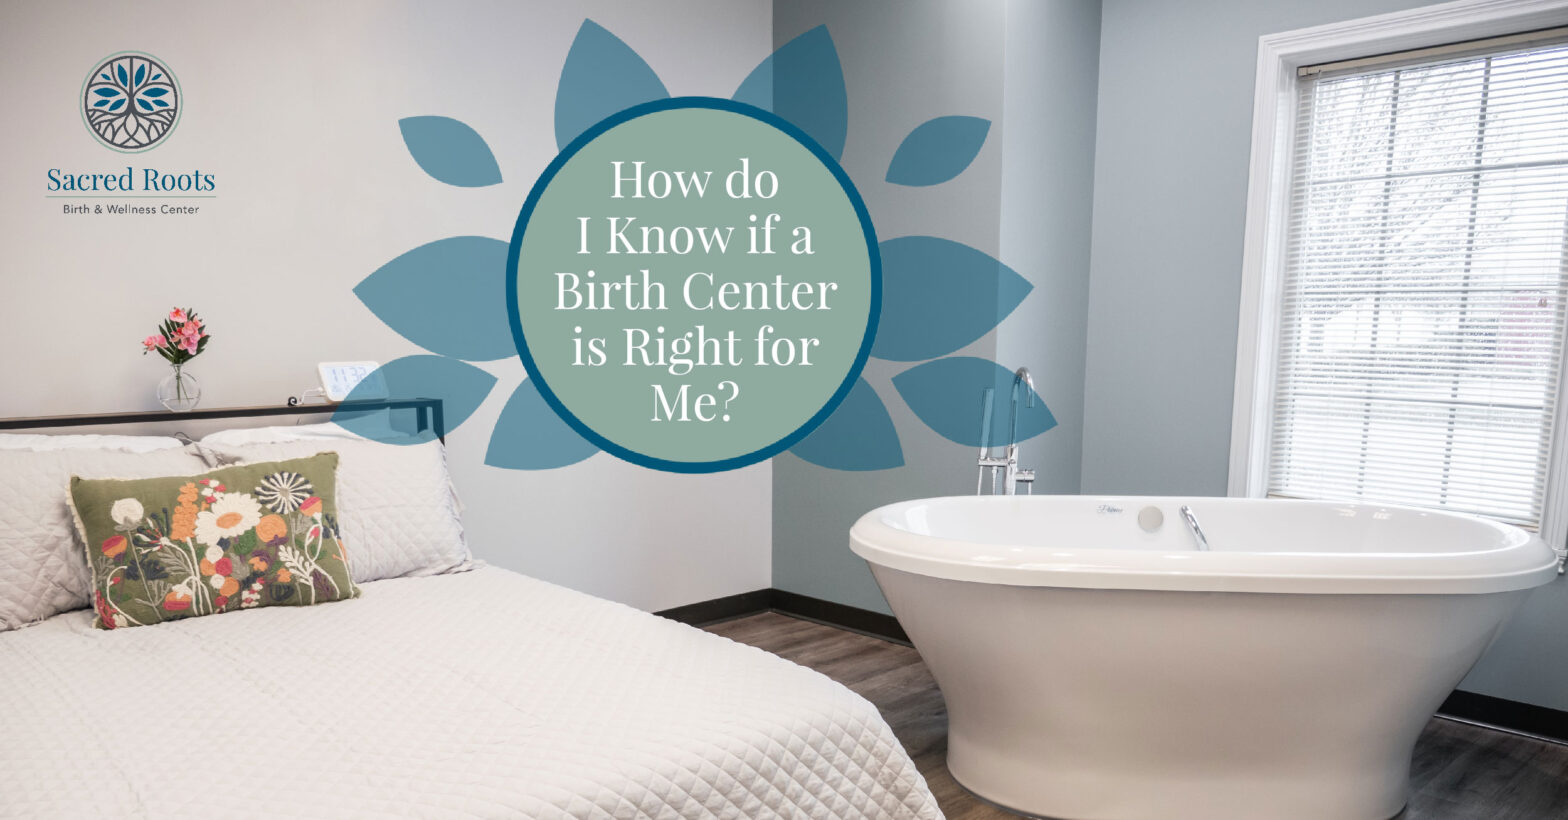 How do I Know if a Birth Center is Right for Me